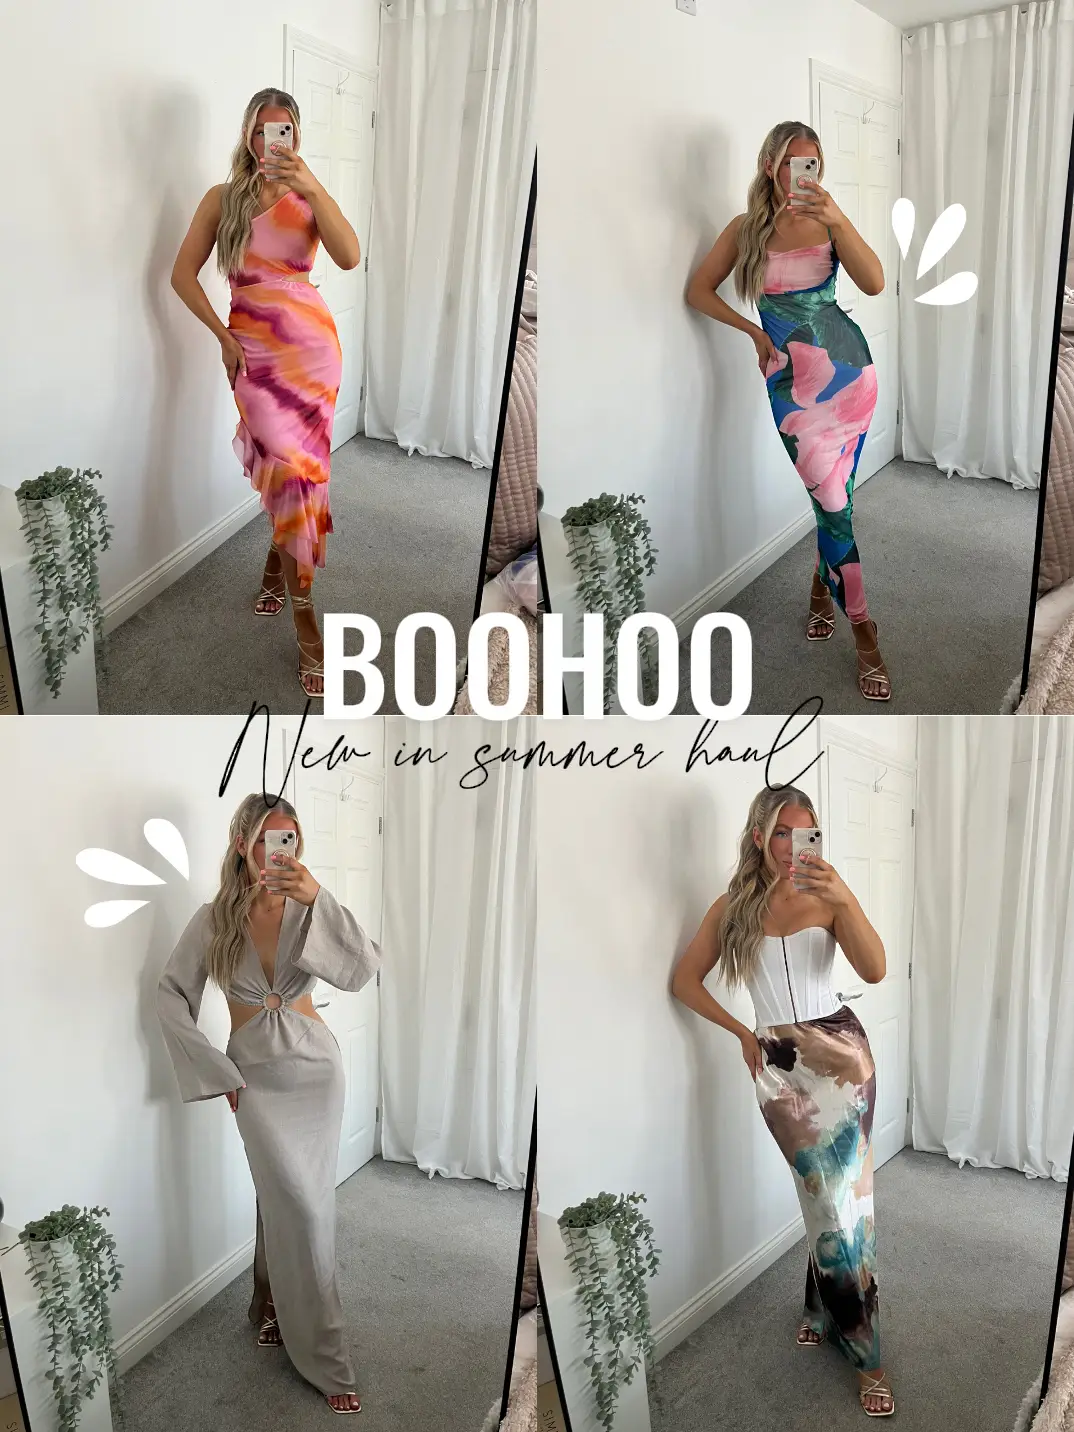 Boohoo Plus Size Haul Featuring Summer Dresses For Curvy Women 